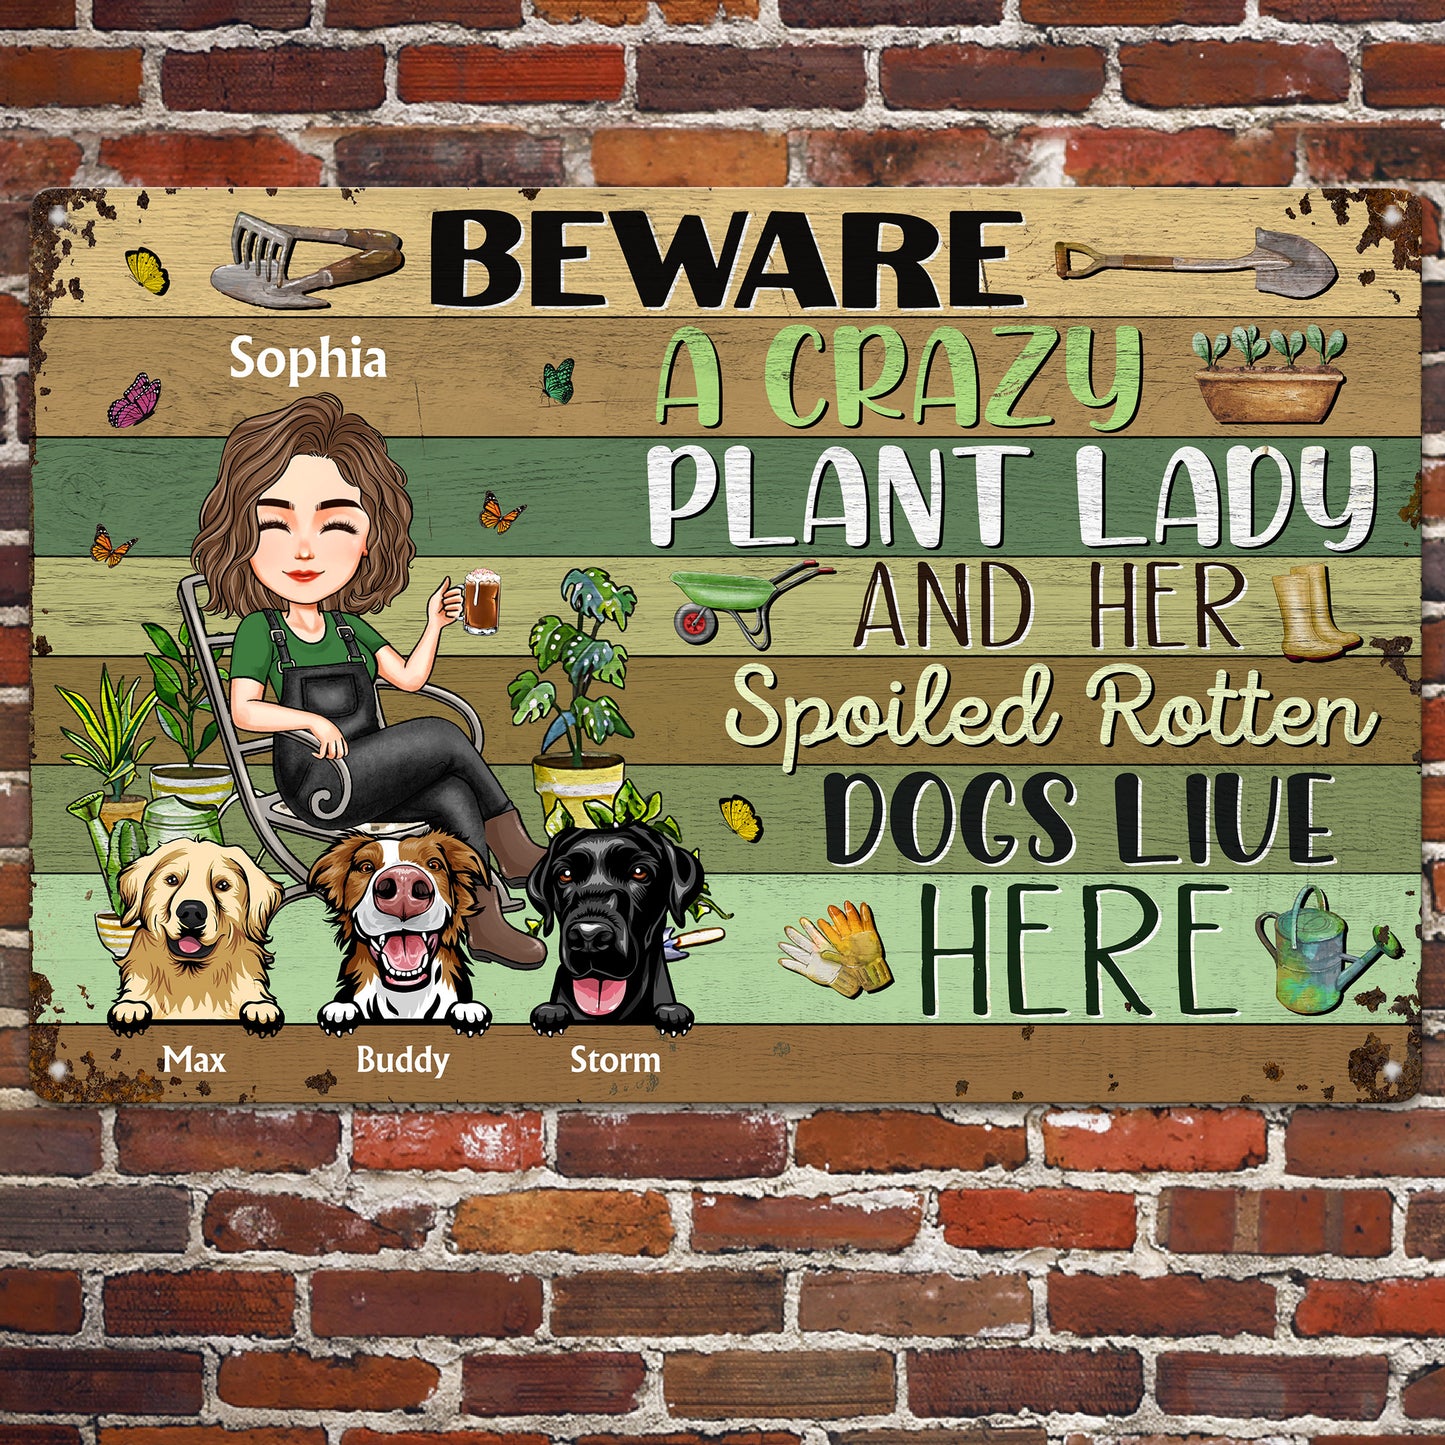 Crazy Plant Lady Lives Here - Personalized Metal Sign